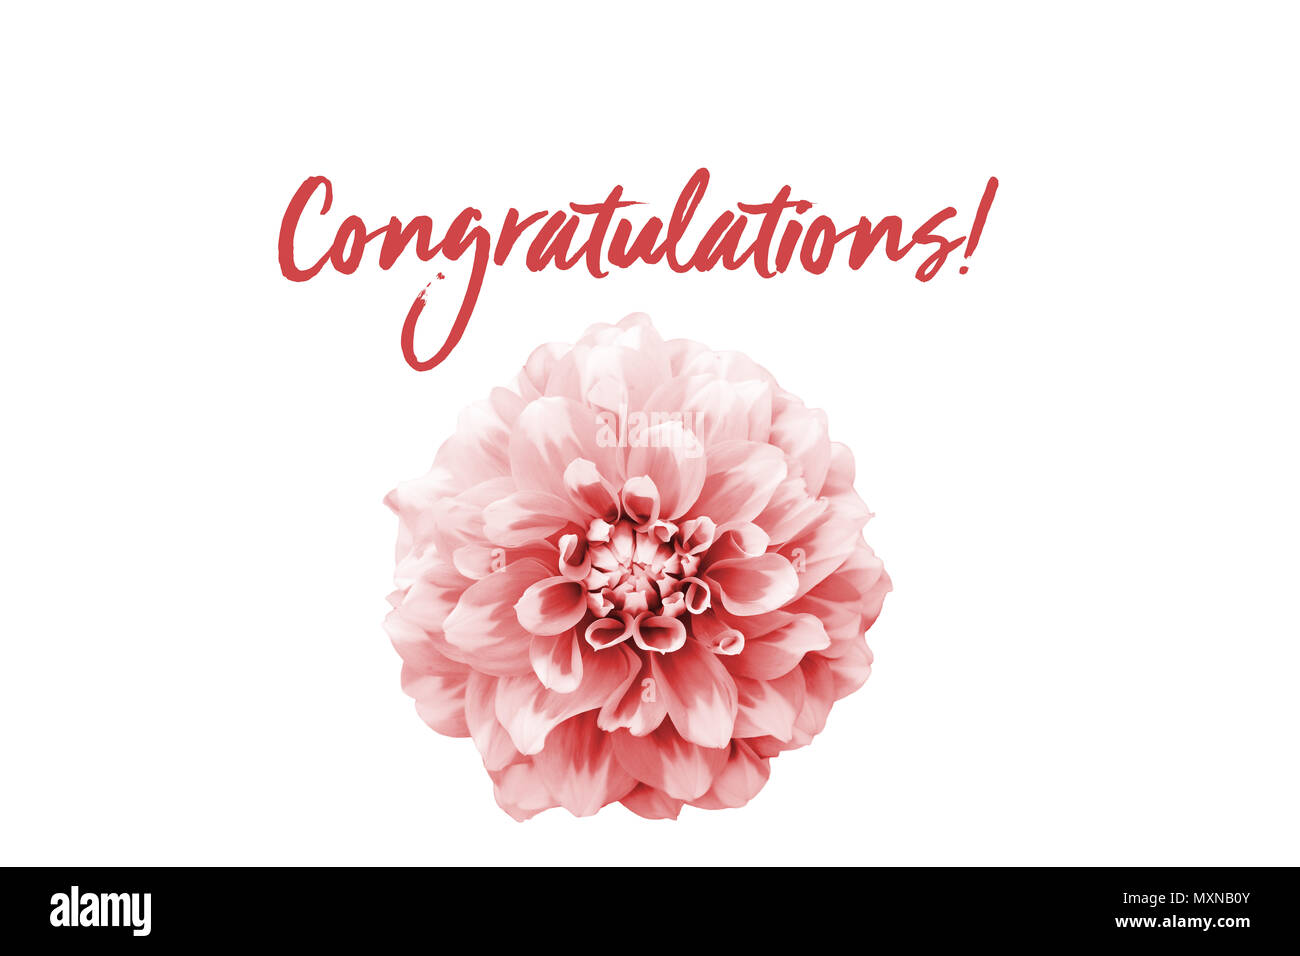 Congratulations pink text message and pink and white dahlia flower ...